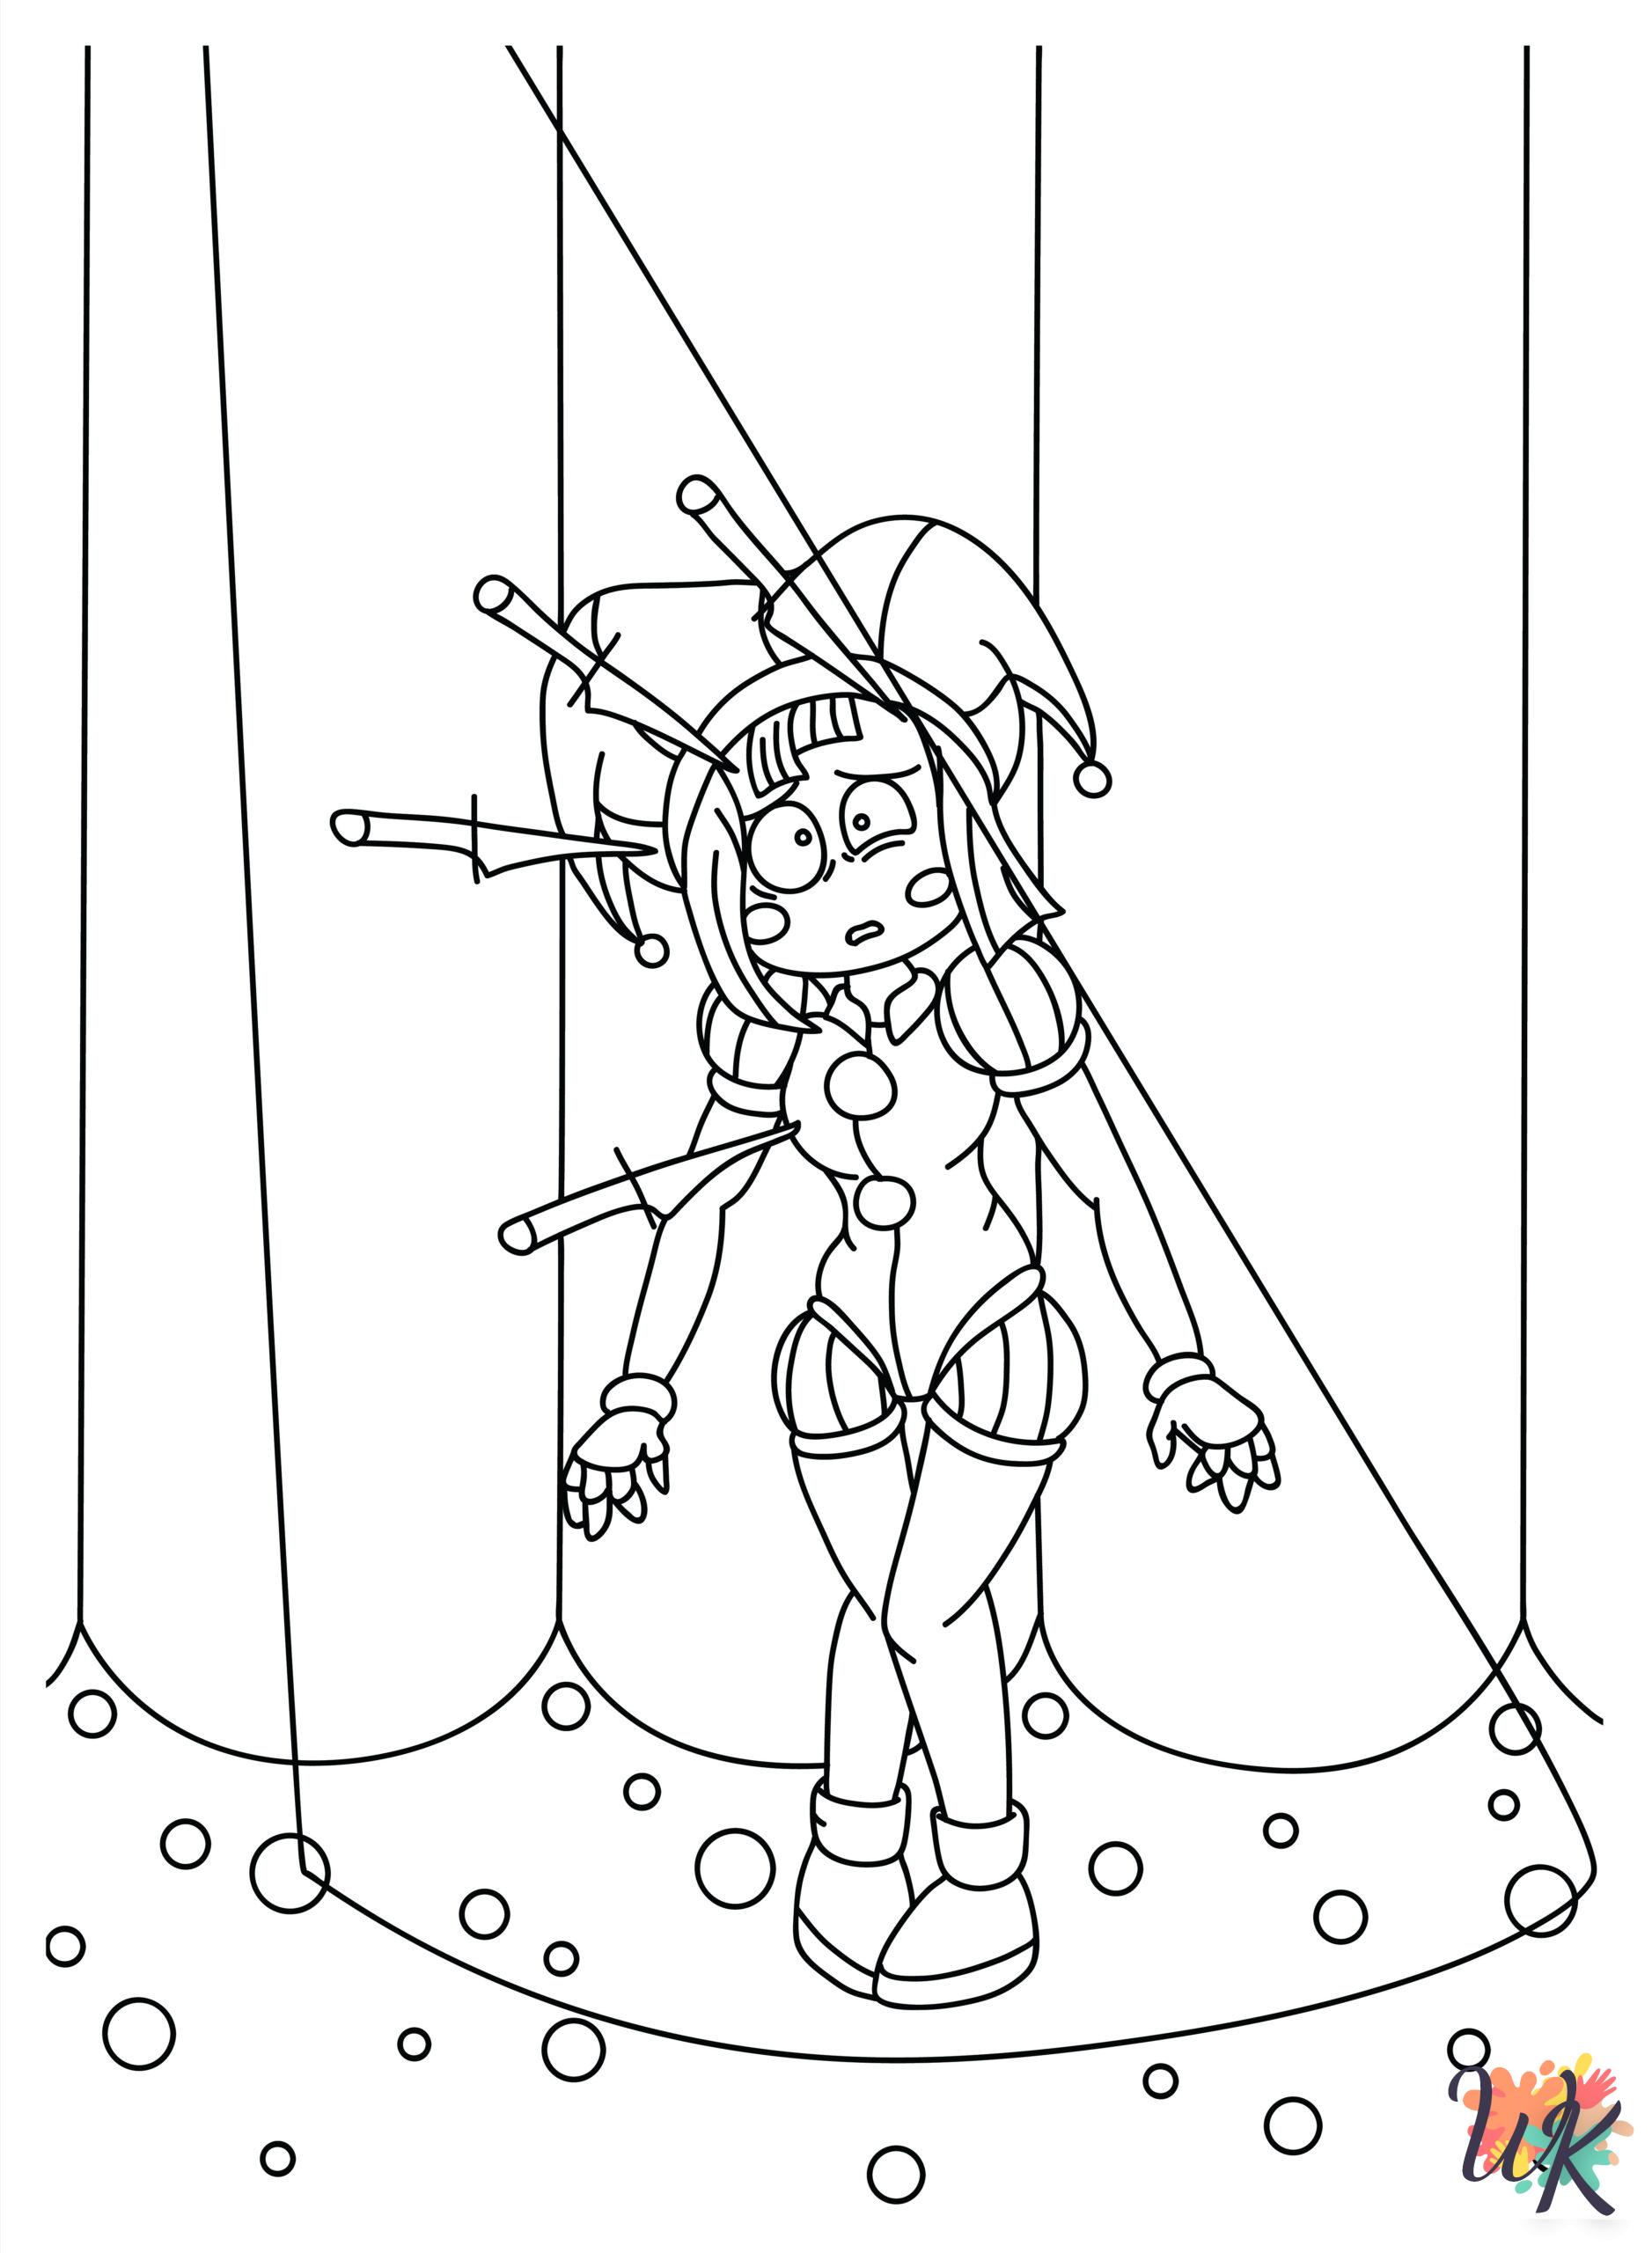 kids The Amazing Digital Circus coloring pages